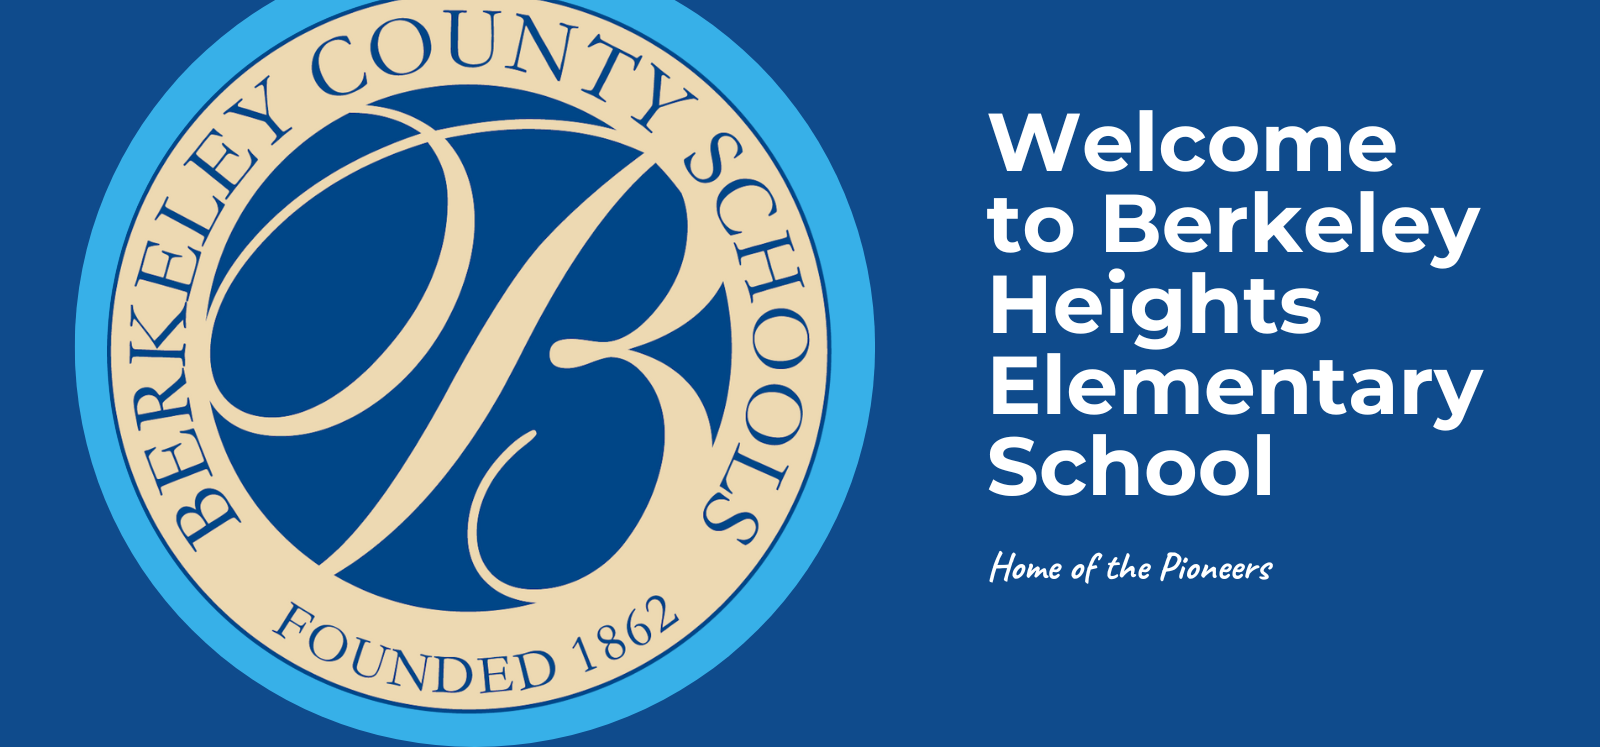 image of banner that says welcome to berkeley heights elementary school and home of the pioneers